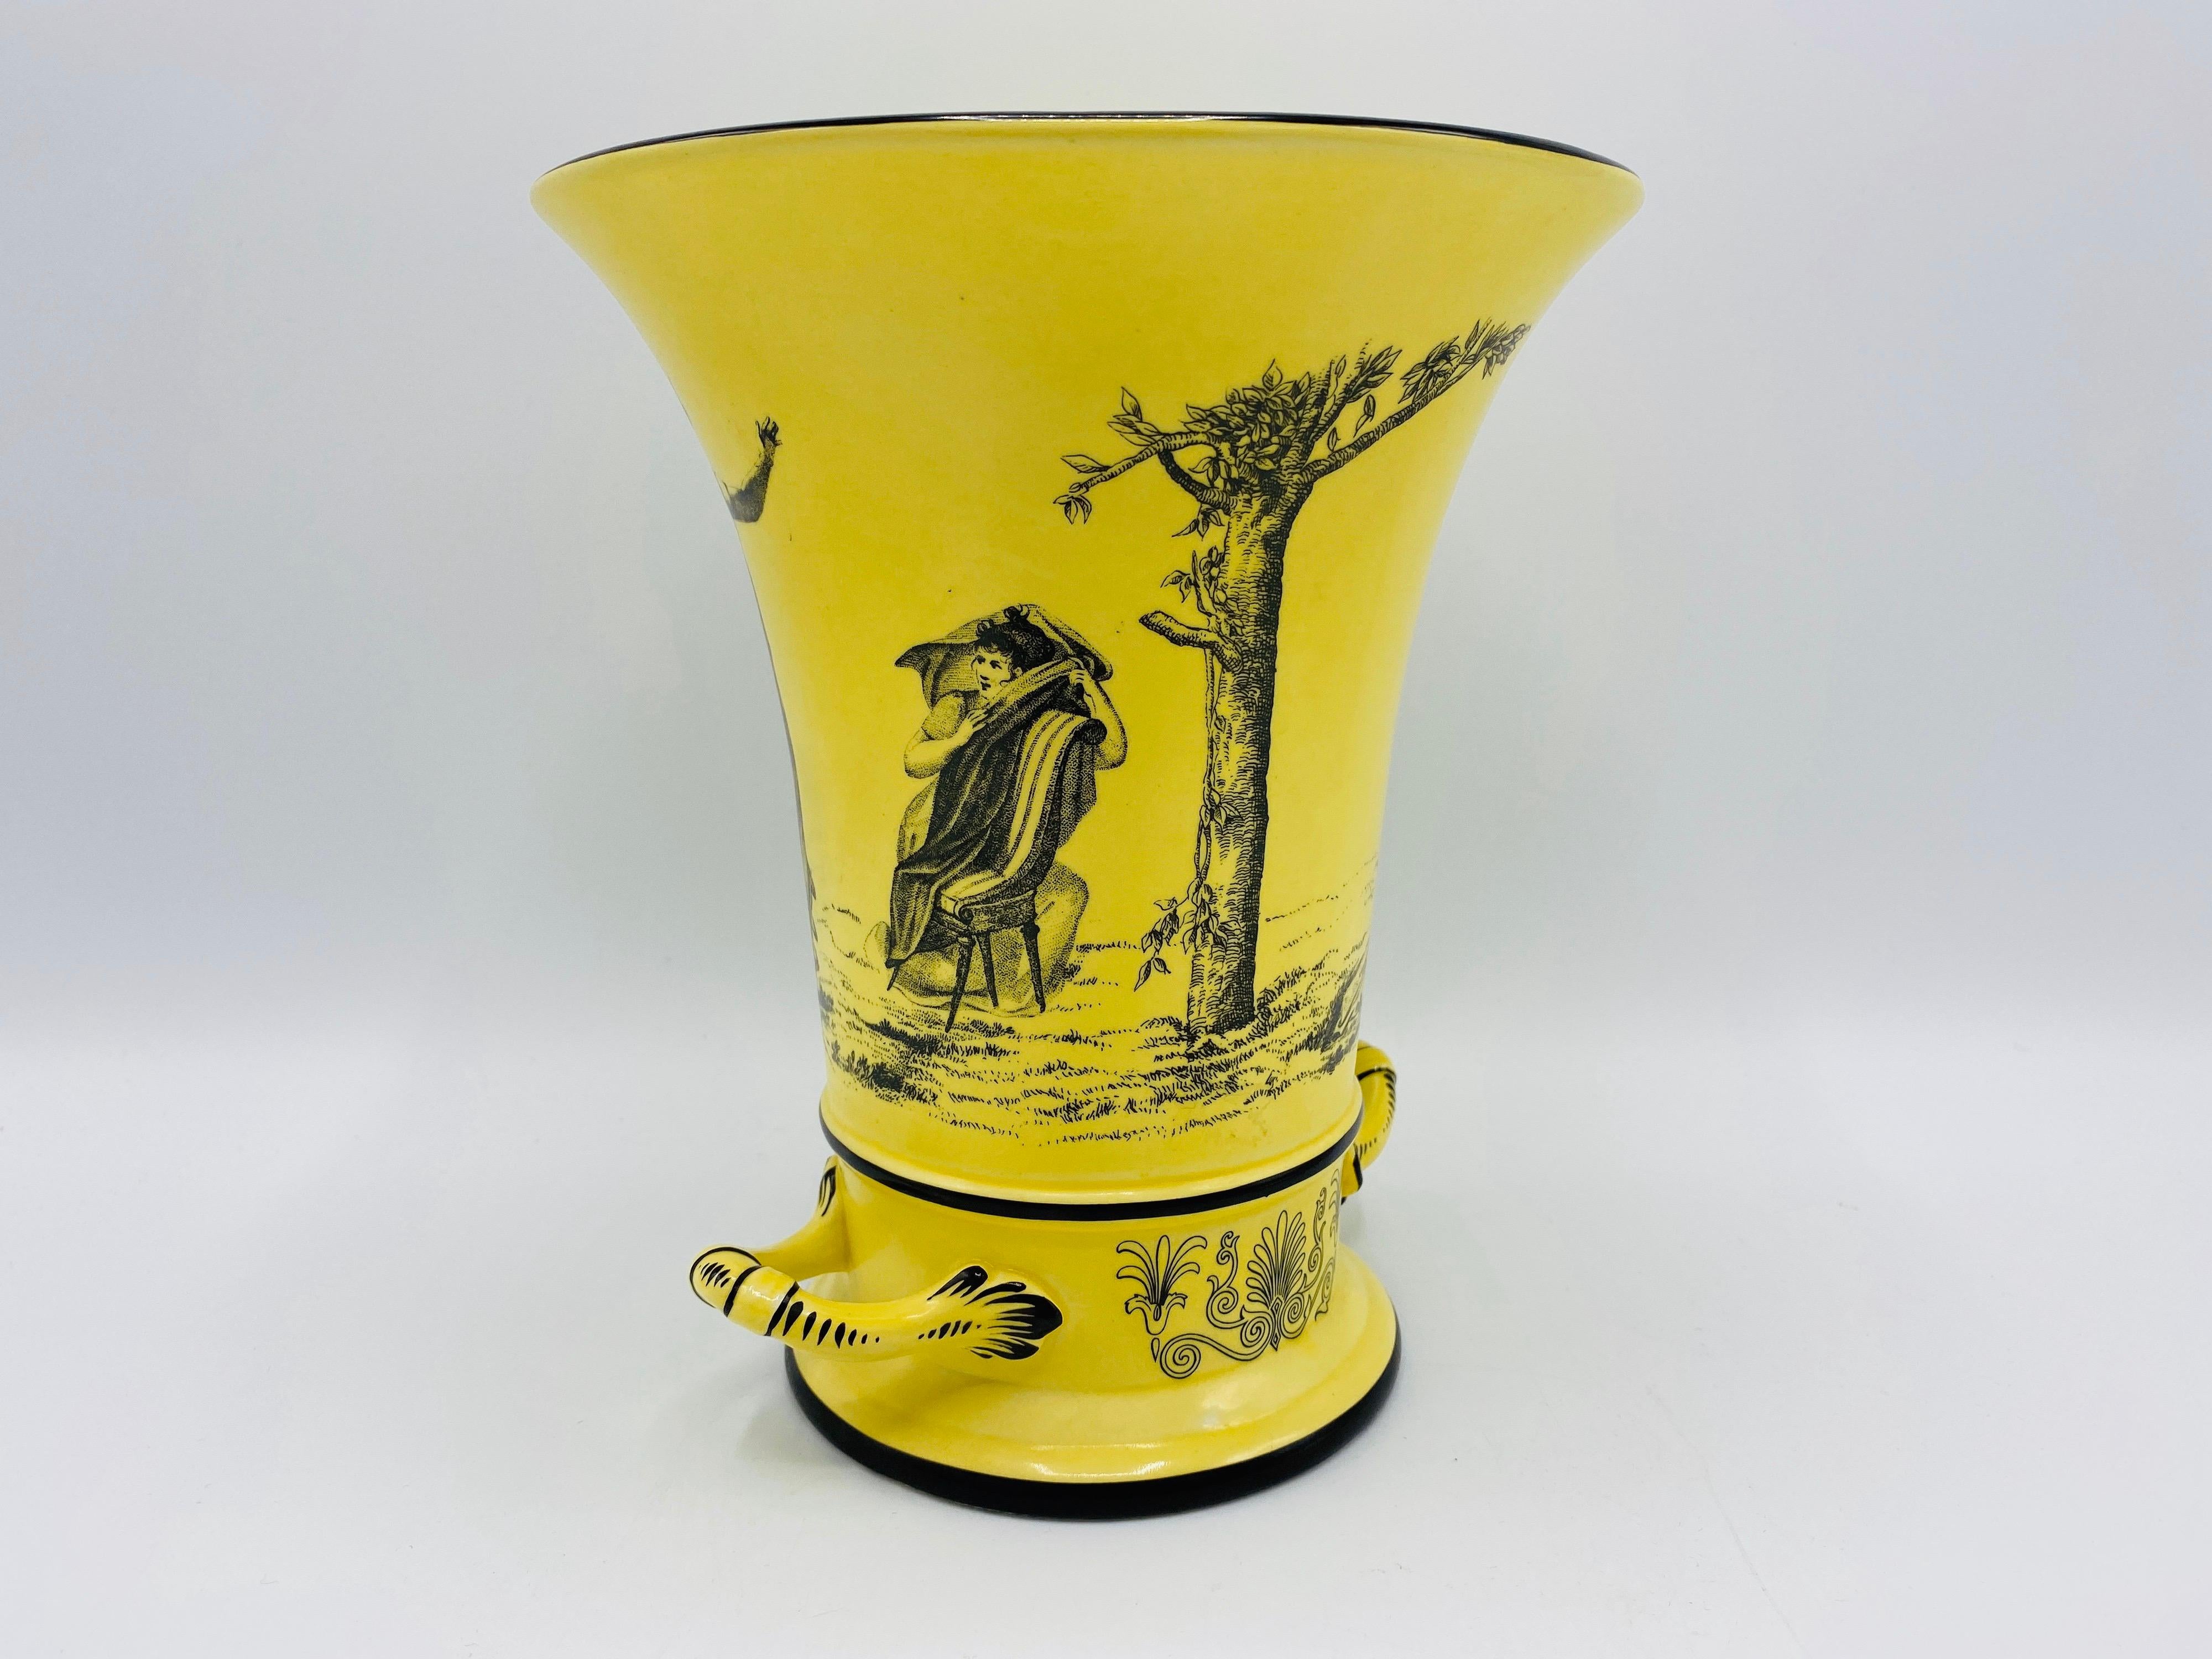 Porcelain Italian Mottahedeh Yellow and Black Toile Handled Urn Vases, Pair, 1960s For Sale